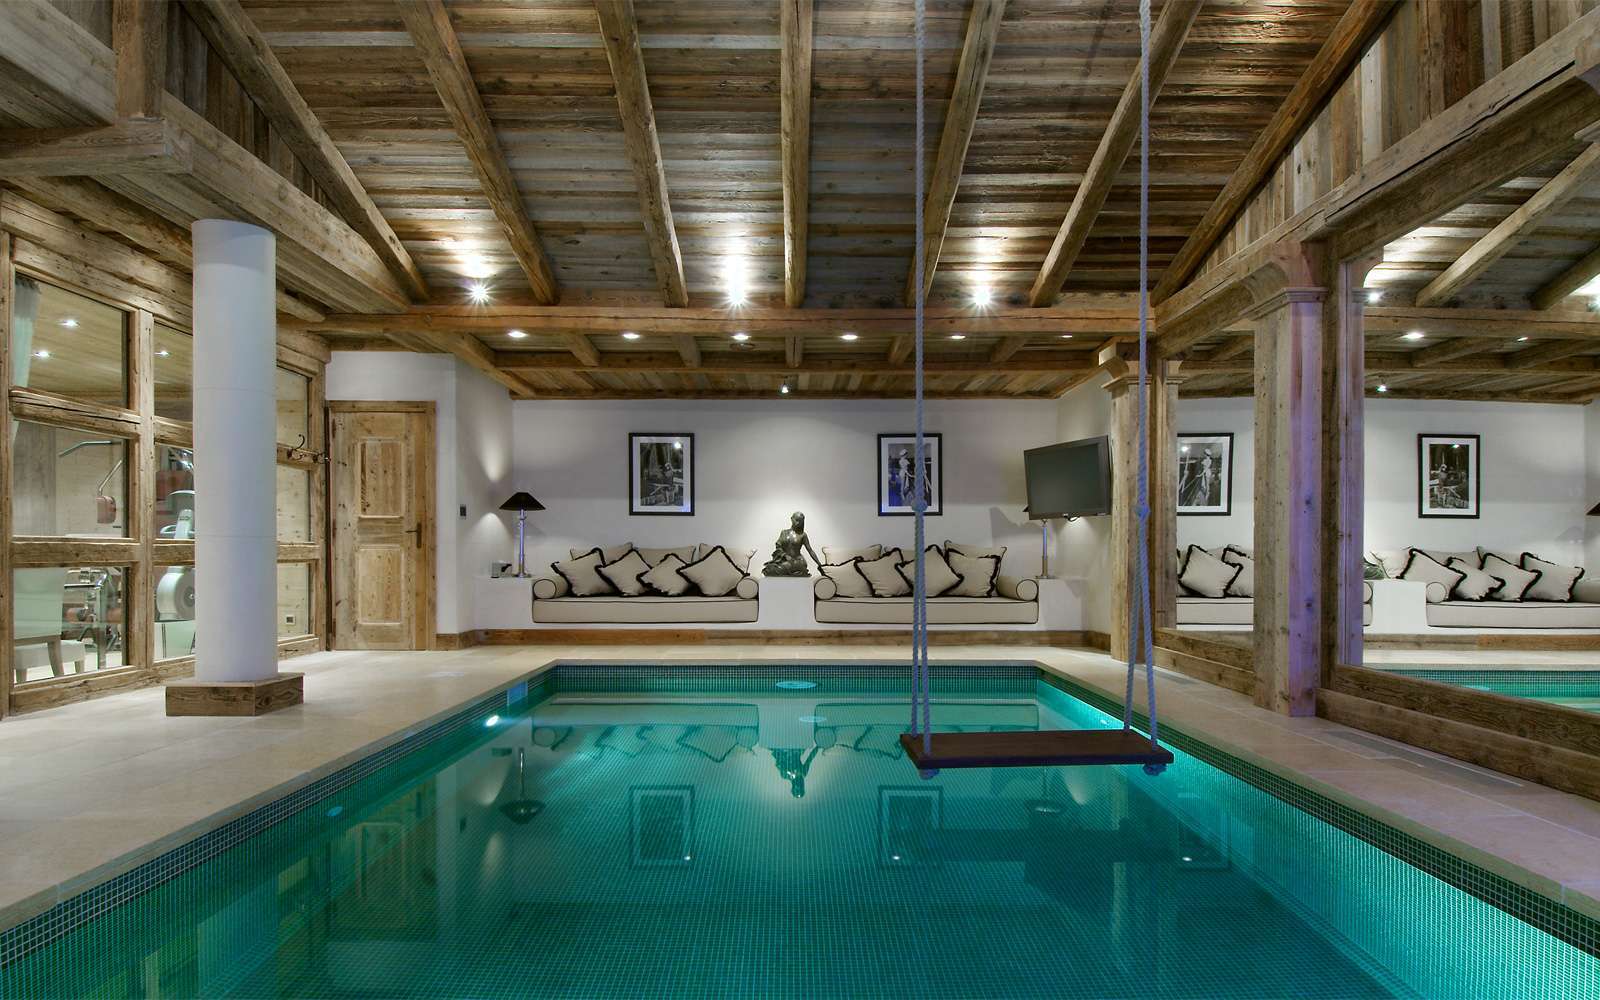 Kings-avenue-courchevel-sauna-jacuzzi-hammam-swimming-pool-Childfriendly-parking-cinema-gym-bootheaters-fireplace-lift-massage-room-area-courchevel-019-12